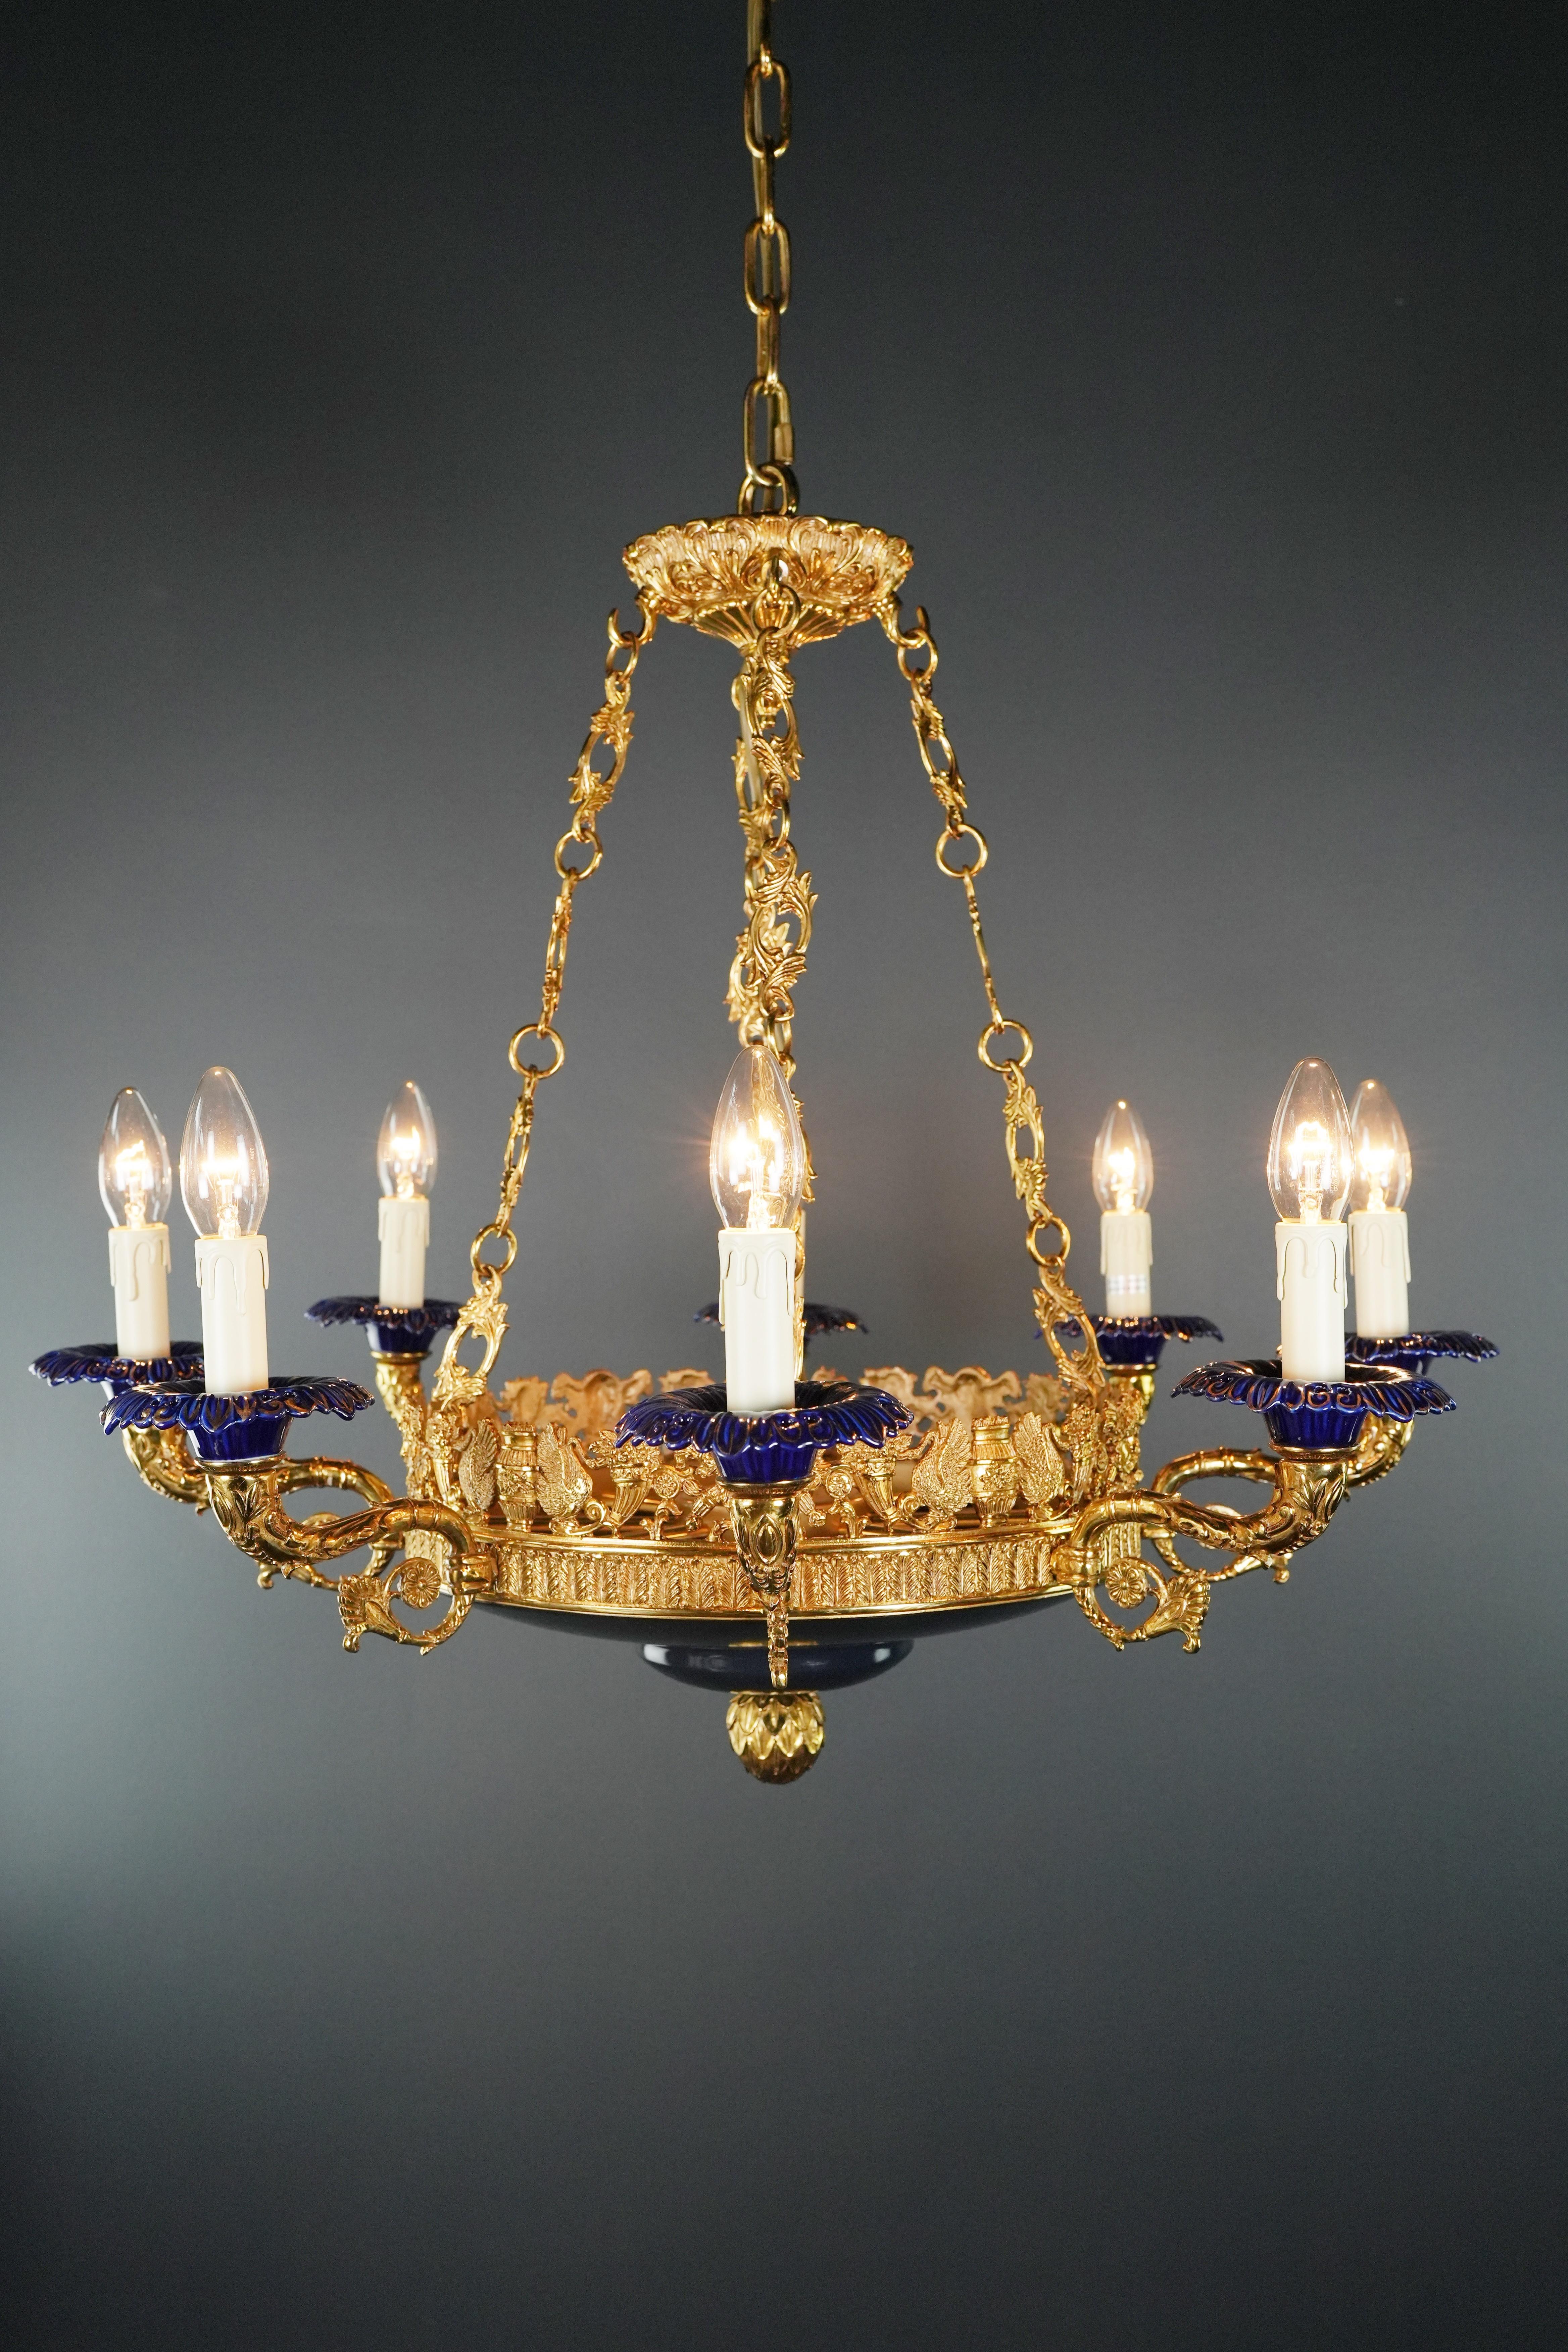 Introducing a stunning brass baroque empire chandelier reminiscent of the classic style of the empire era. This is a new reproduction and there are several available to ensure you can bring this classic beauty into your space.

With a total height